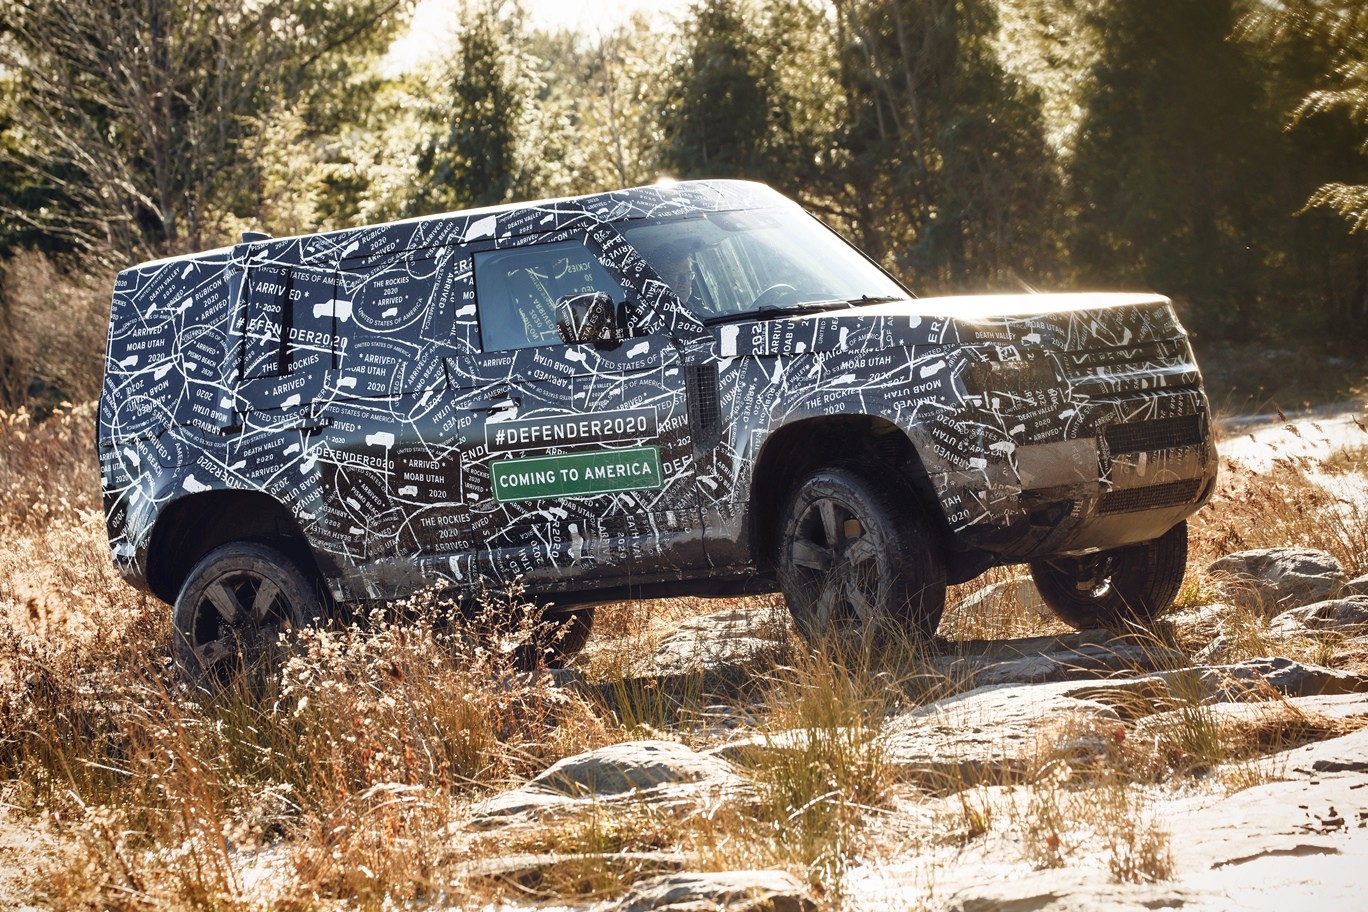 2020 Land Rover Defender Officially Arrives on US Shores